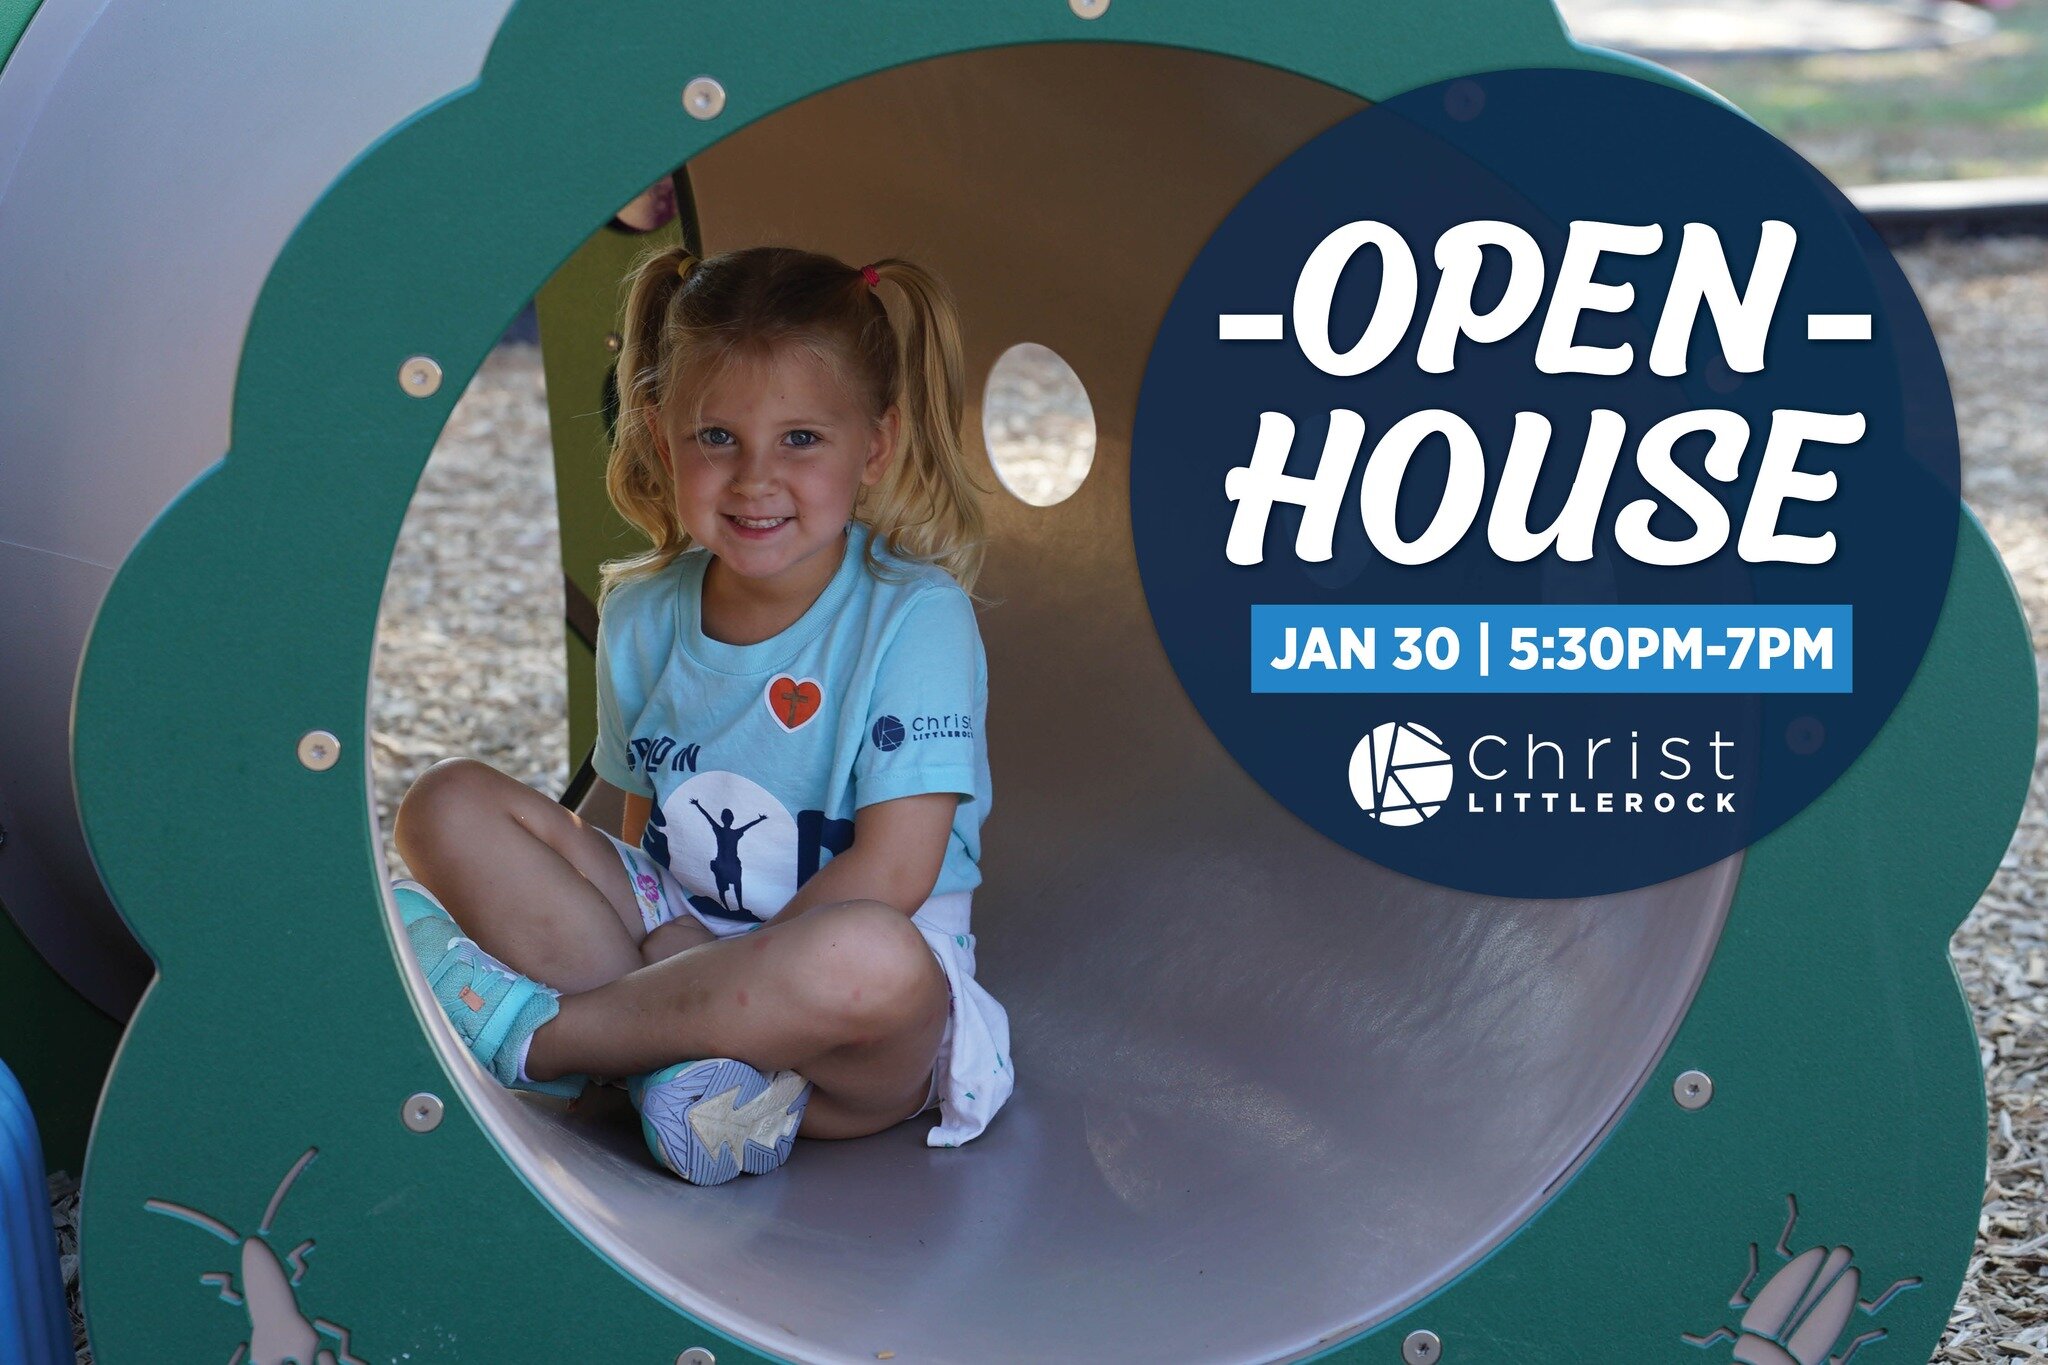 Is it time for your preschooler to transition to the Kindergarten? Or are you looking for a transition for one of your older children? We're hosting a drop-in Open House for Kindergarten through 8th Grade on Tuesday, January 30 from 5:30pm to 7pm. St